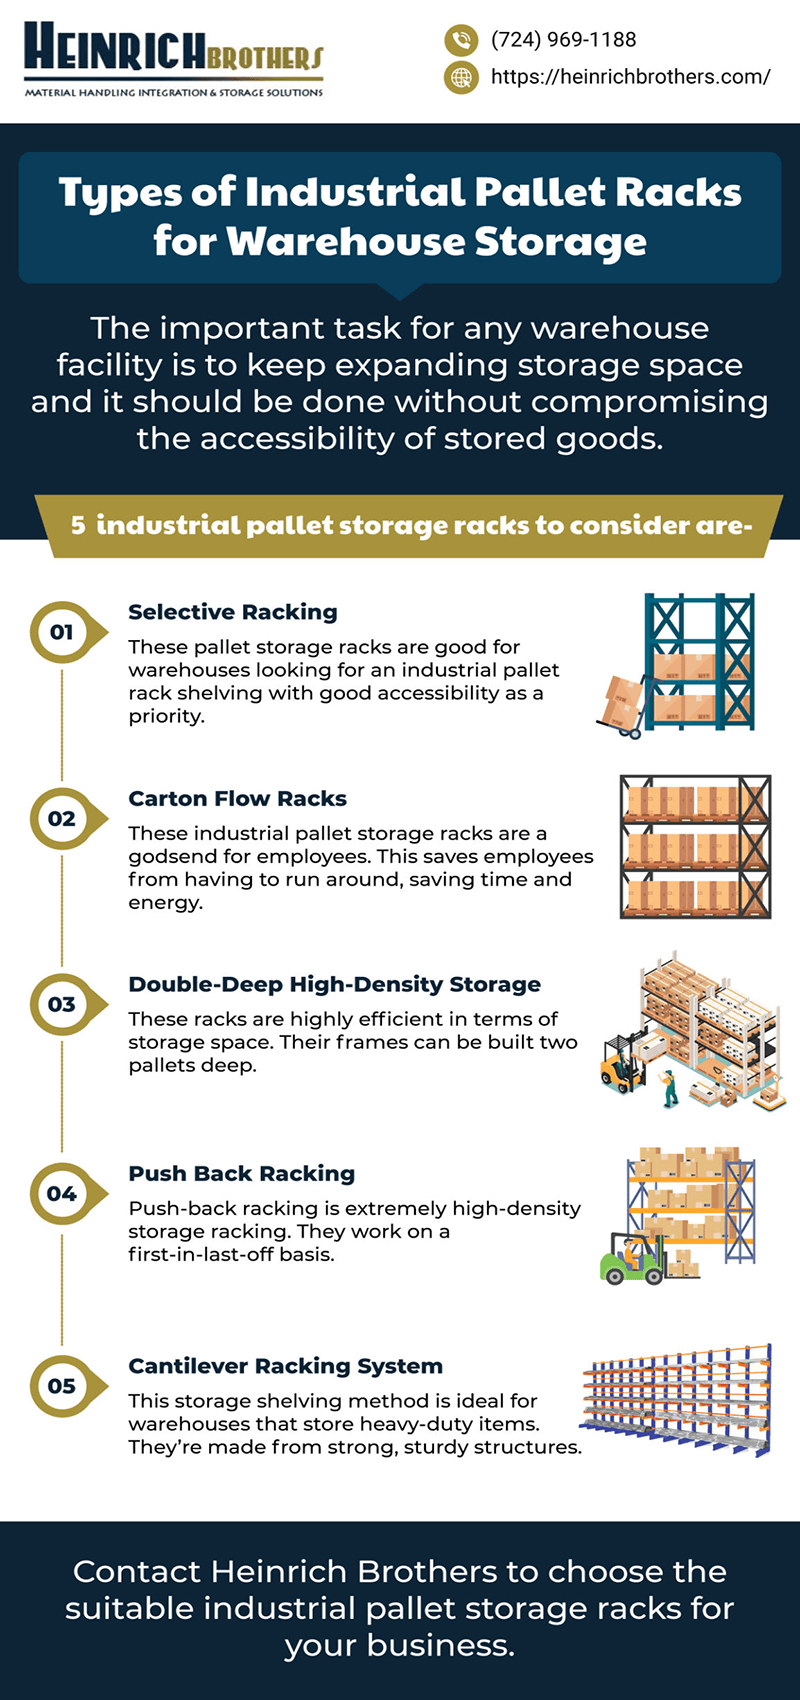 Types of Industrial Pallet Racks for Warehouse Storage